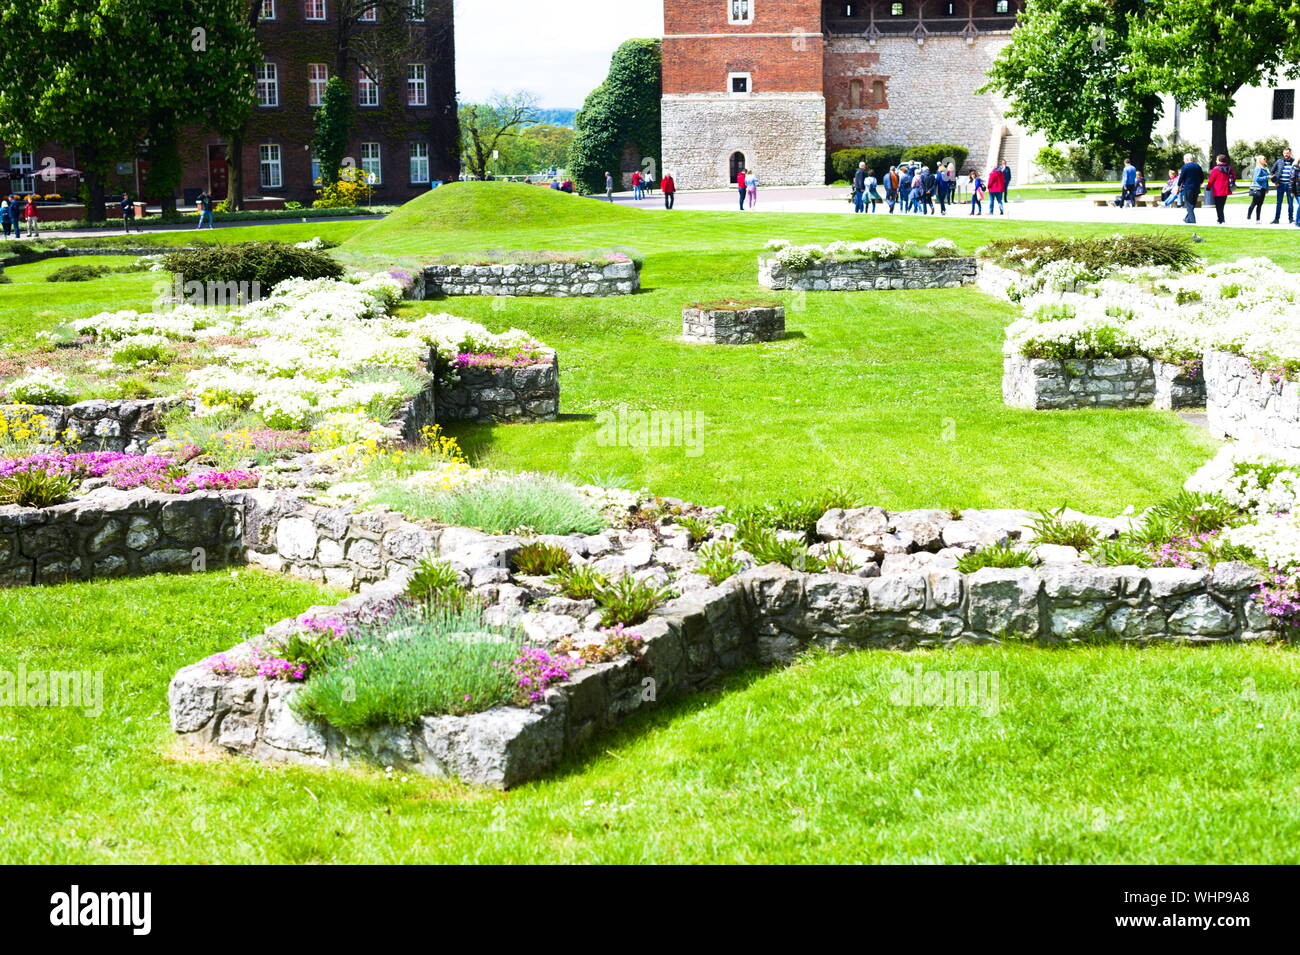 Stone blocks in the gardens at Wawel Hill castle in Krakow, Poland Stock Photo